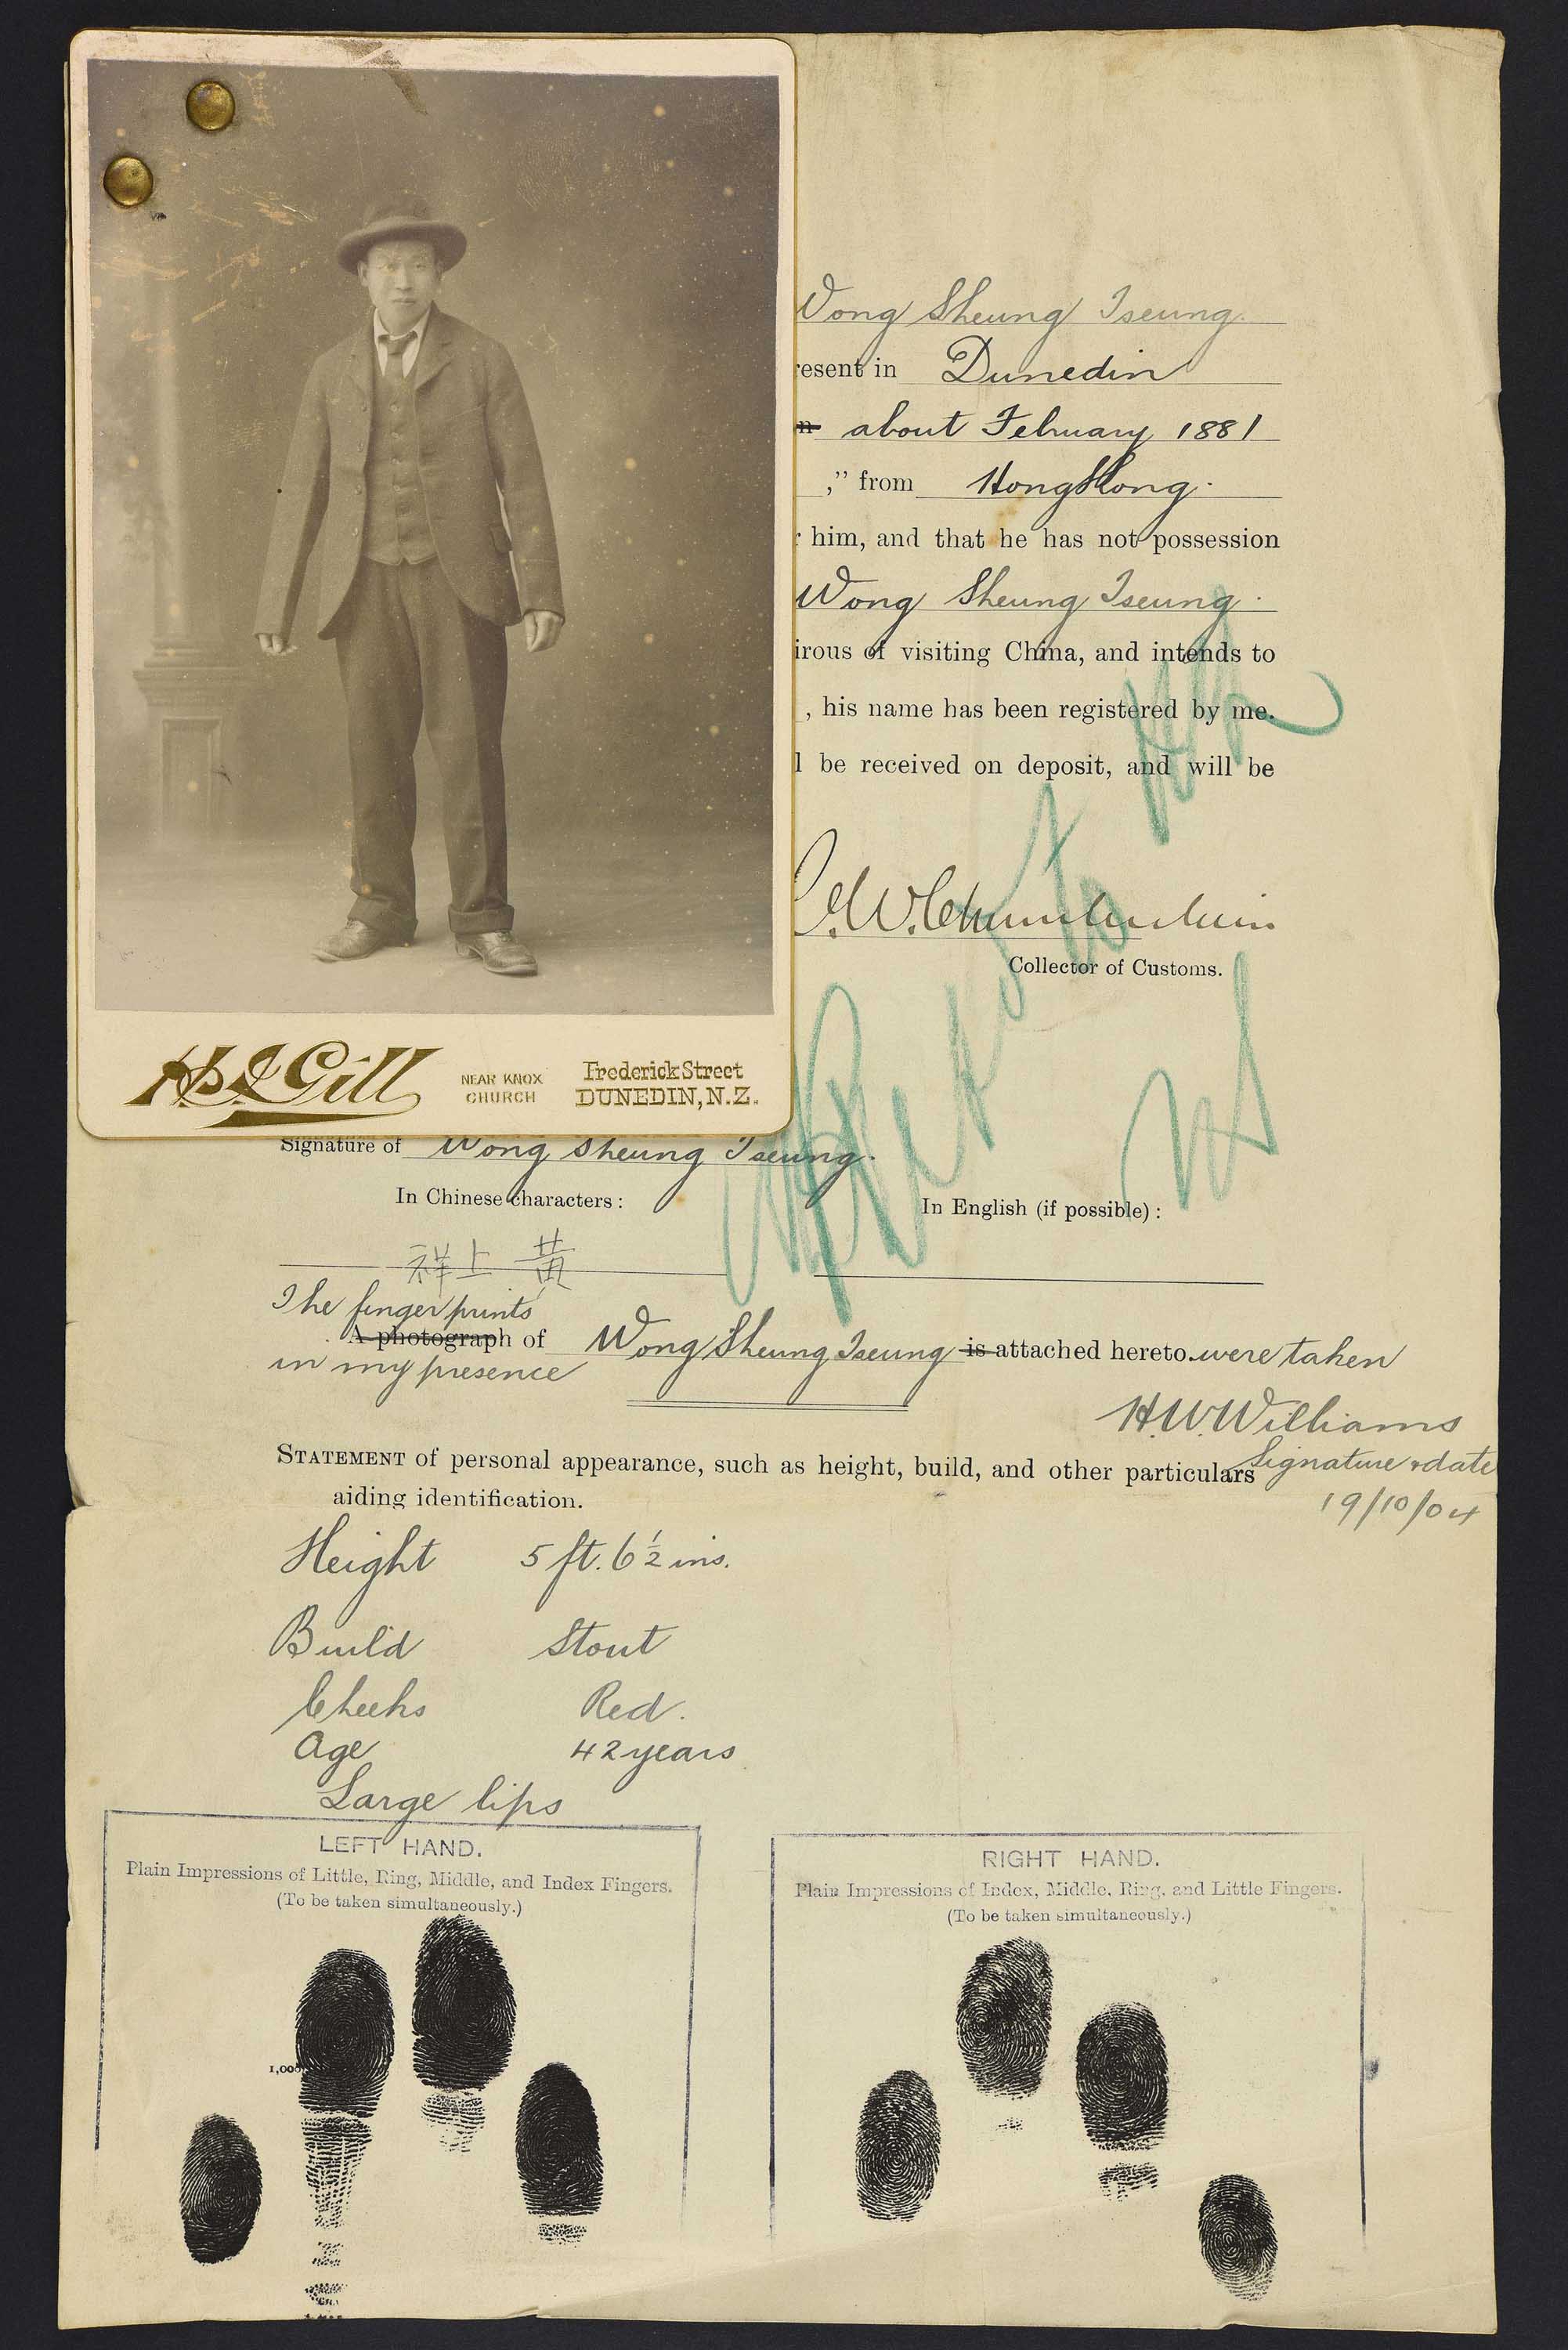 Sepia photo portrait of a standing Chinese man pinned to his immigration papers